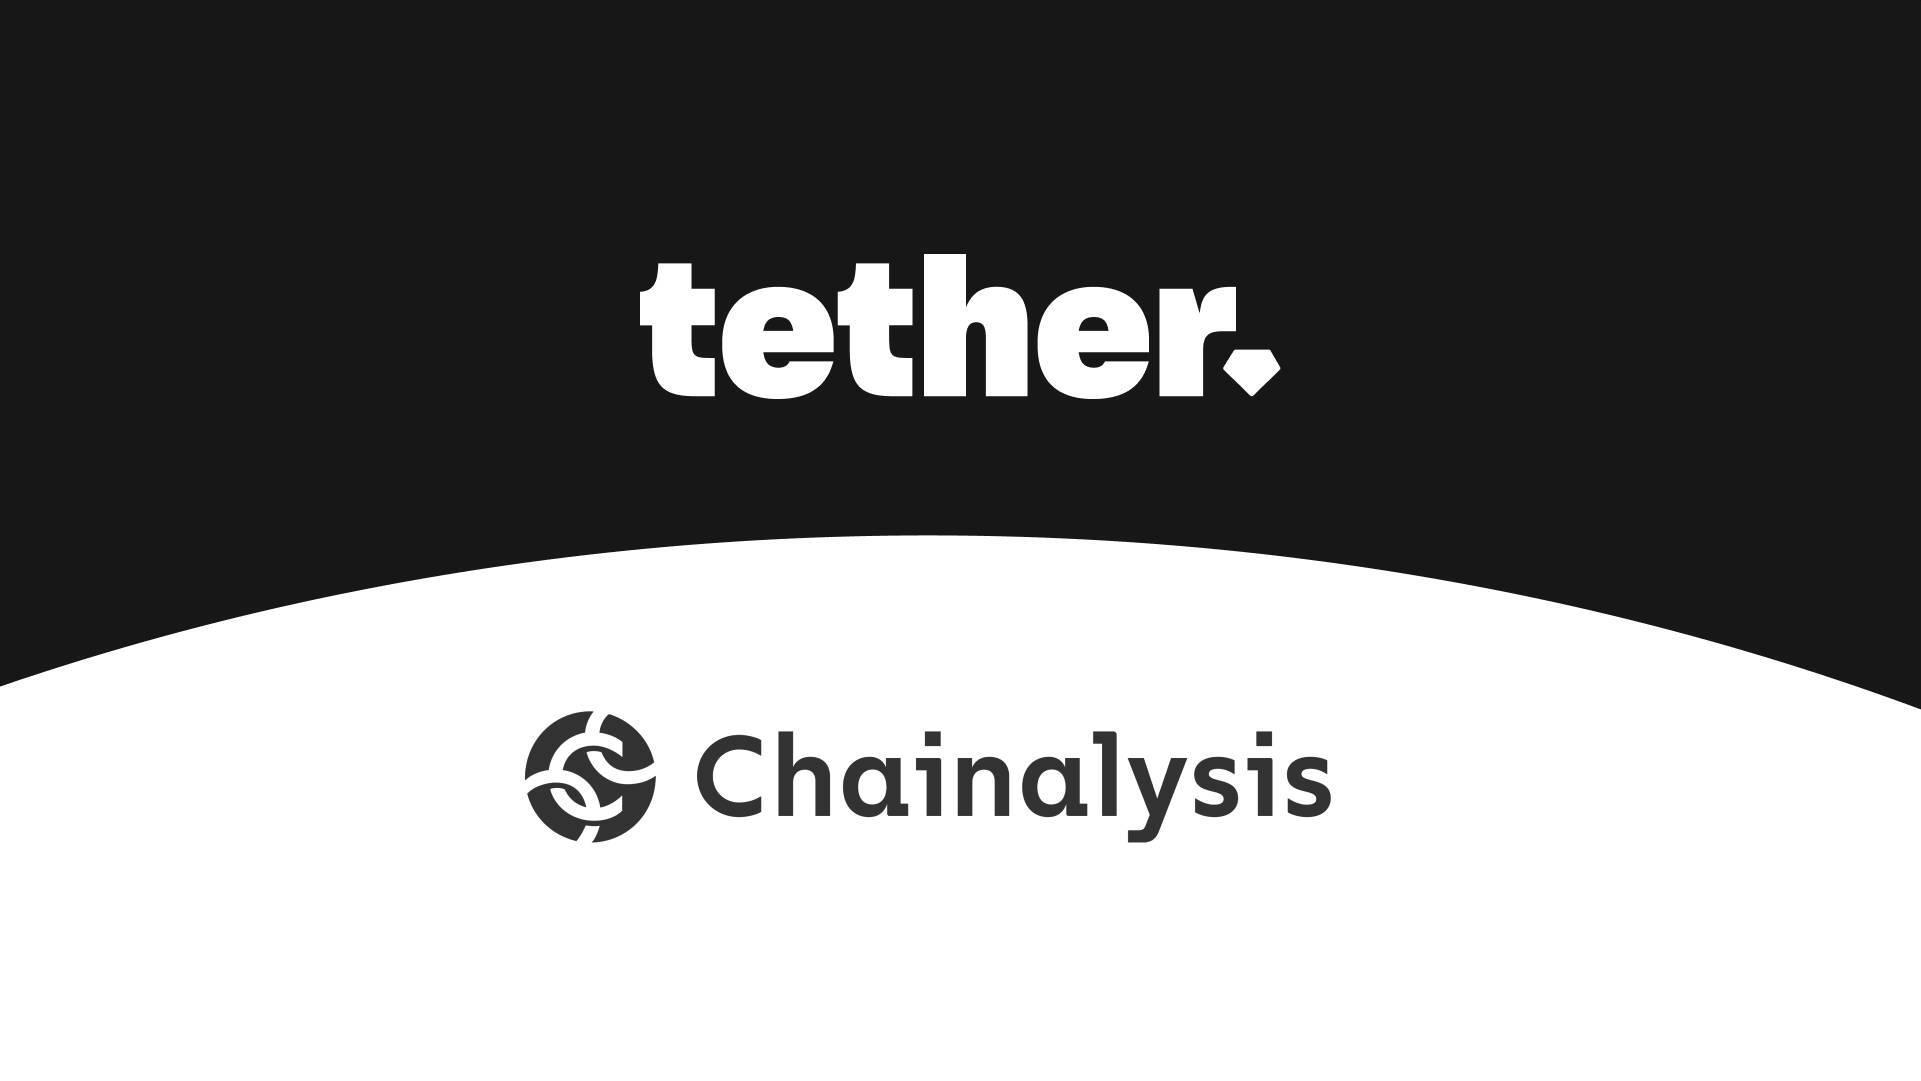 tether-hop-tac-voi-chainalysis-tang-cuong-giam-sat-giao-dich-usdt